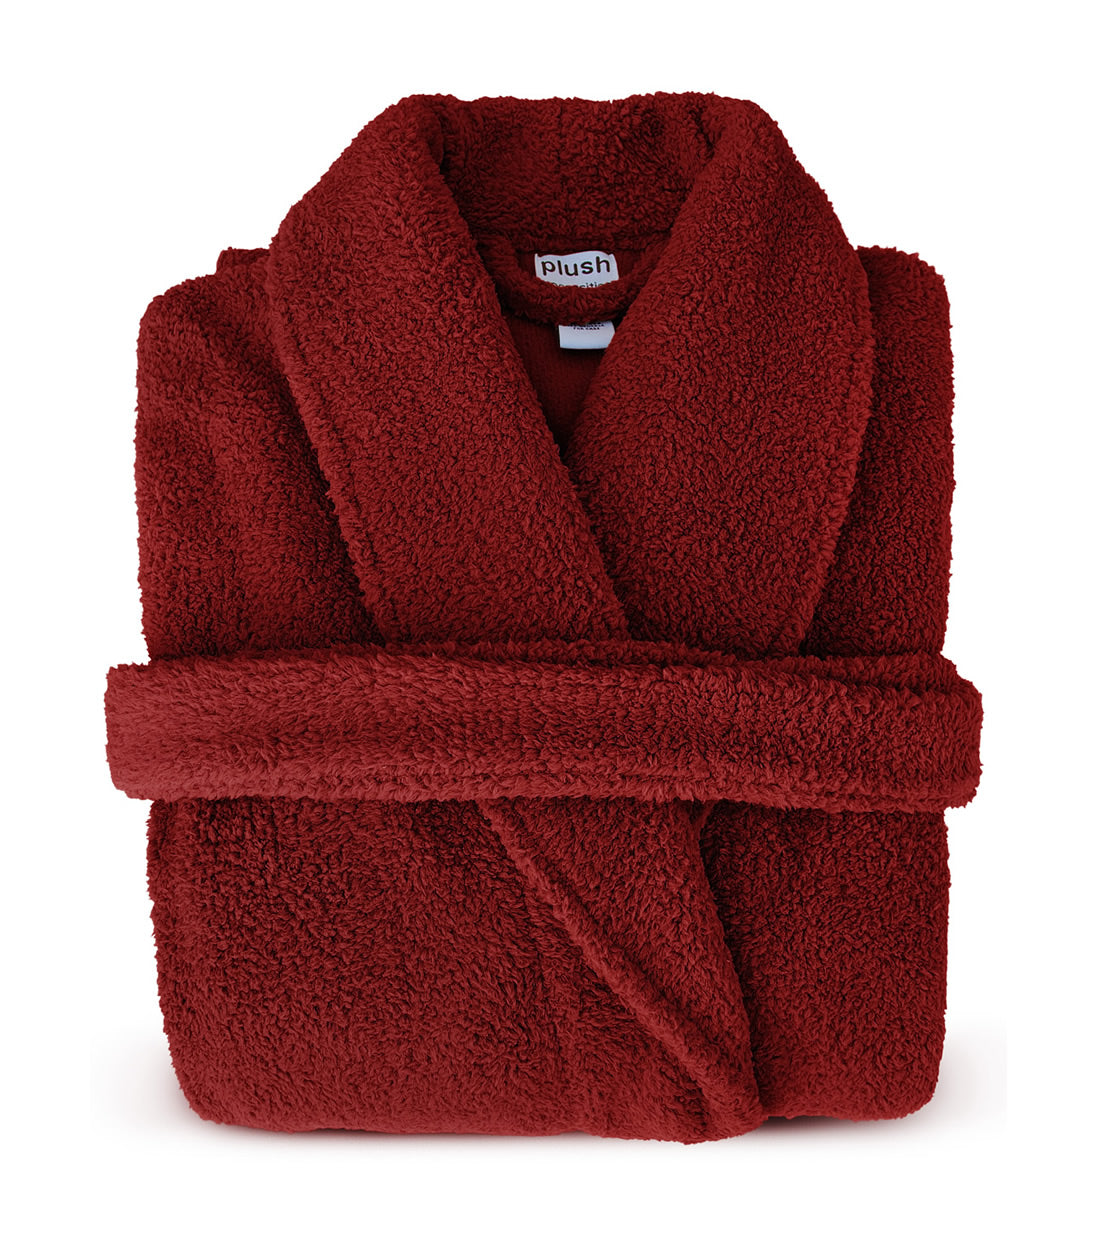 Plush Soft Robes for Christmas and Winter Holidays